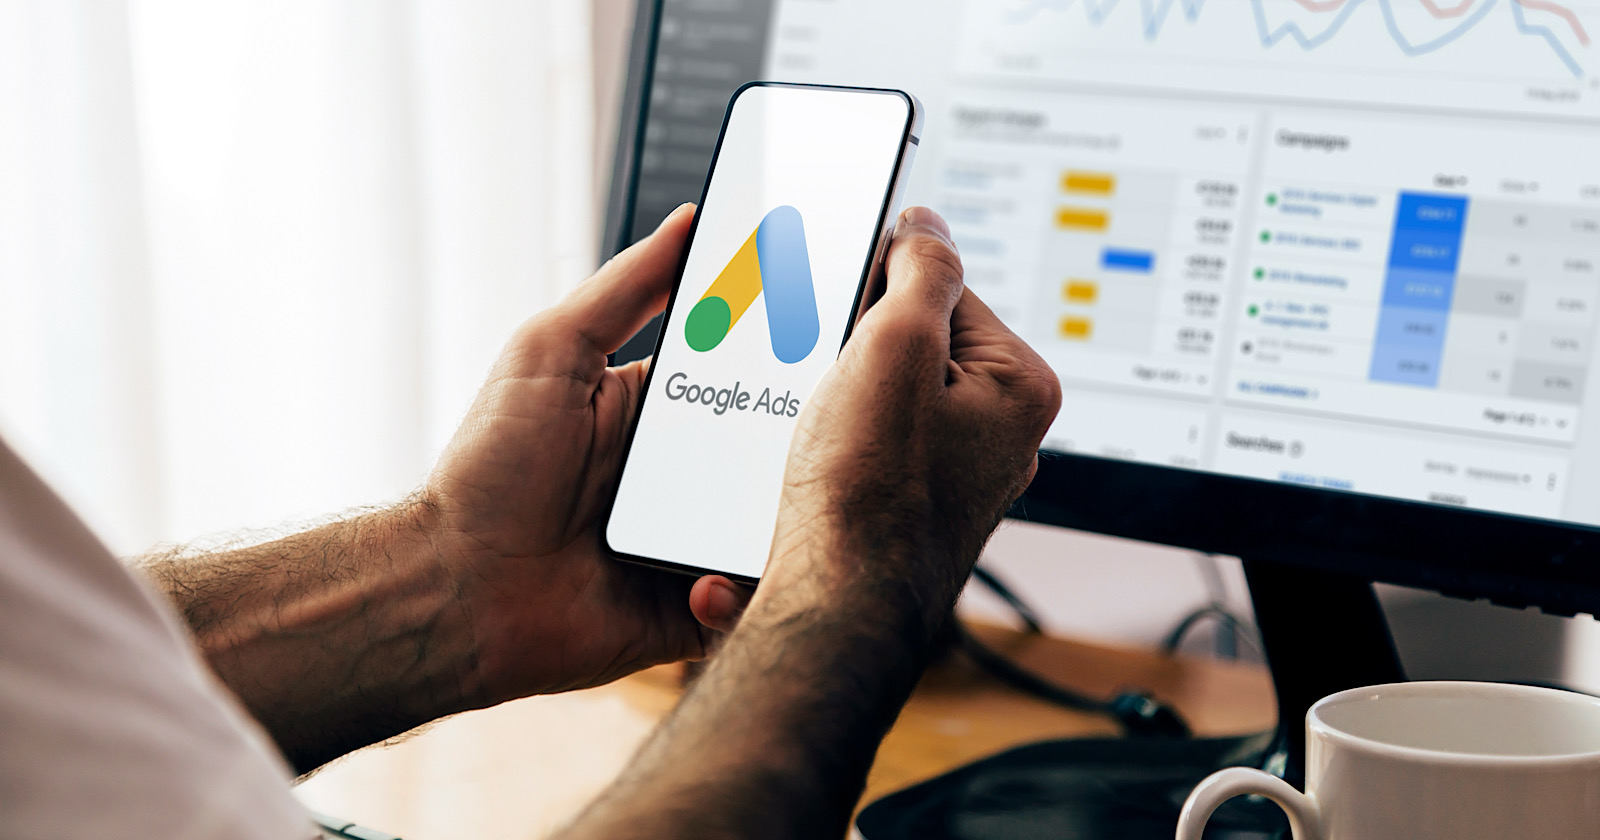 Google Updates Definition Of ‘Top Ads’ In Search Results via @sejournal, @MattGSouthern